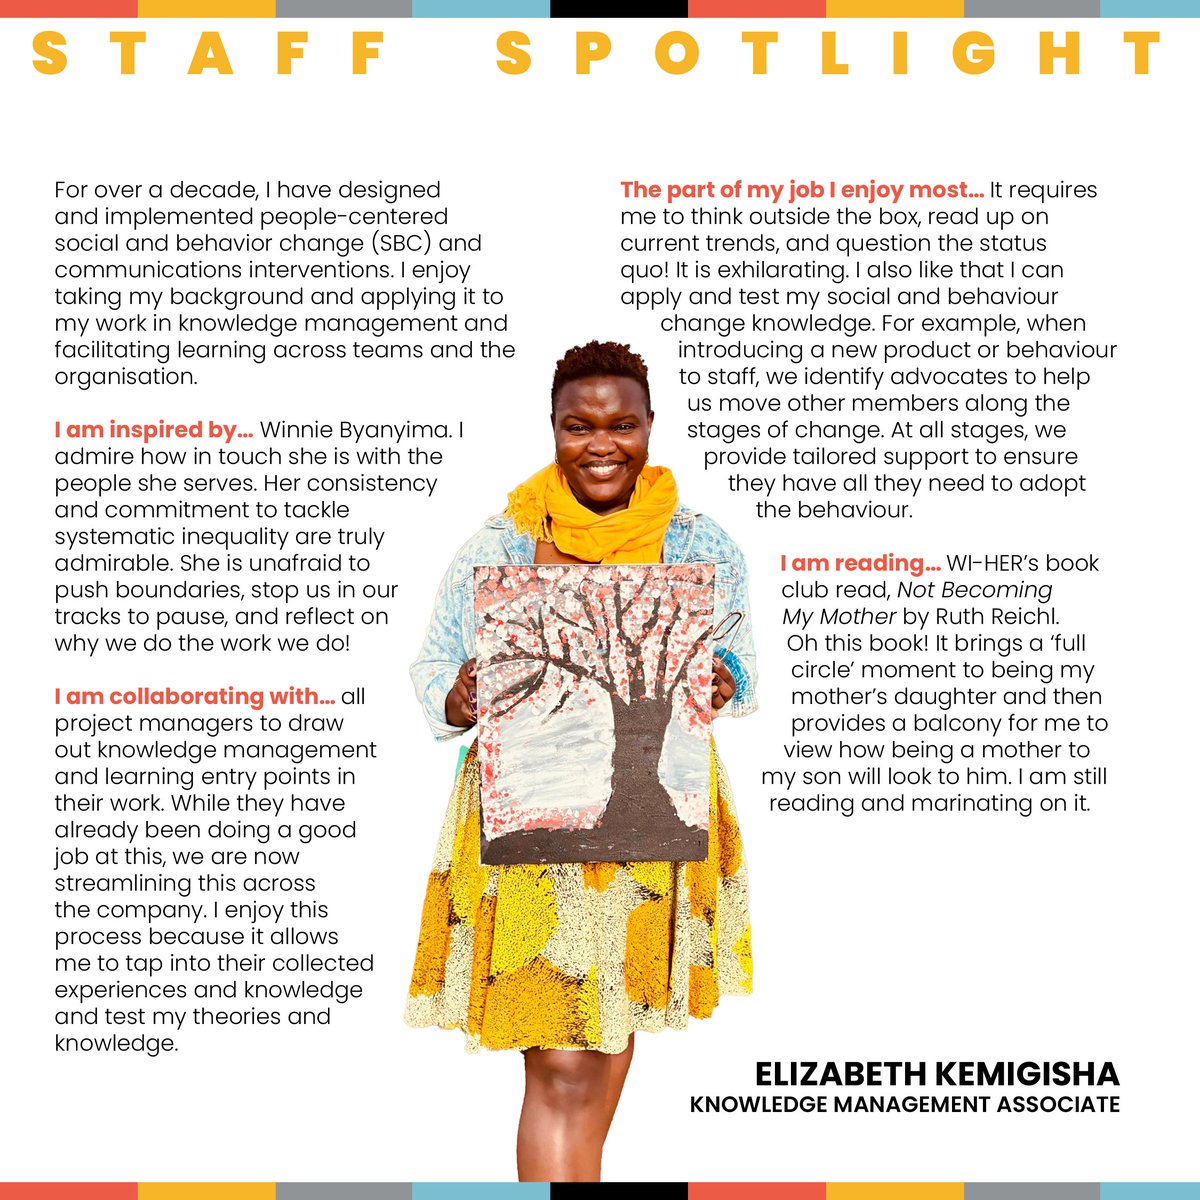 In our latest #StaffSpotlight, WI-HER's @KKagumaho shares who she's inspired by, what she loves about her job, and more. 

#WhoWeAre #OurTeam #KnowledgeManagement